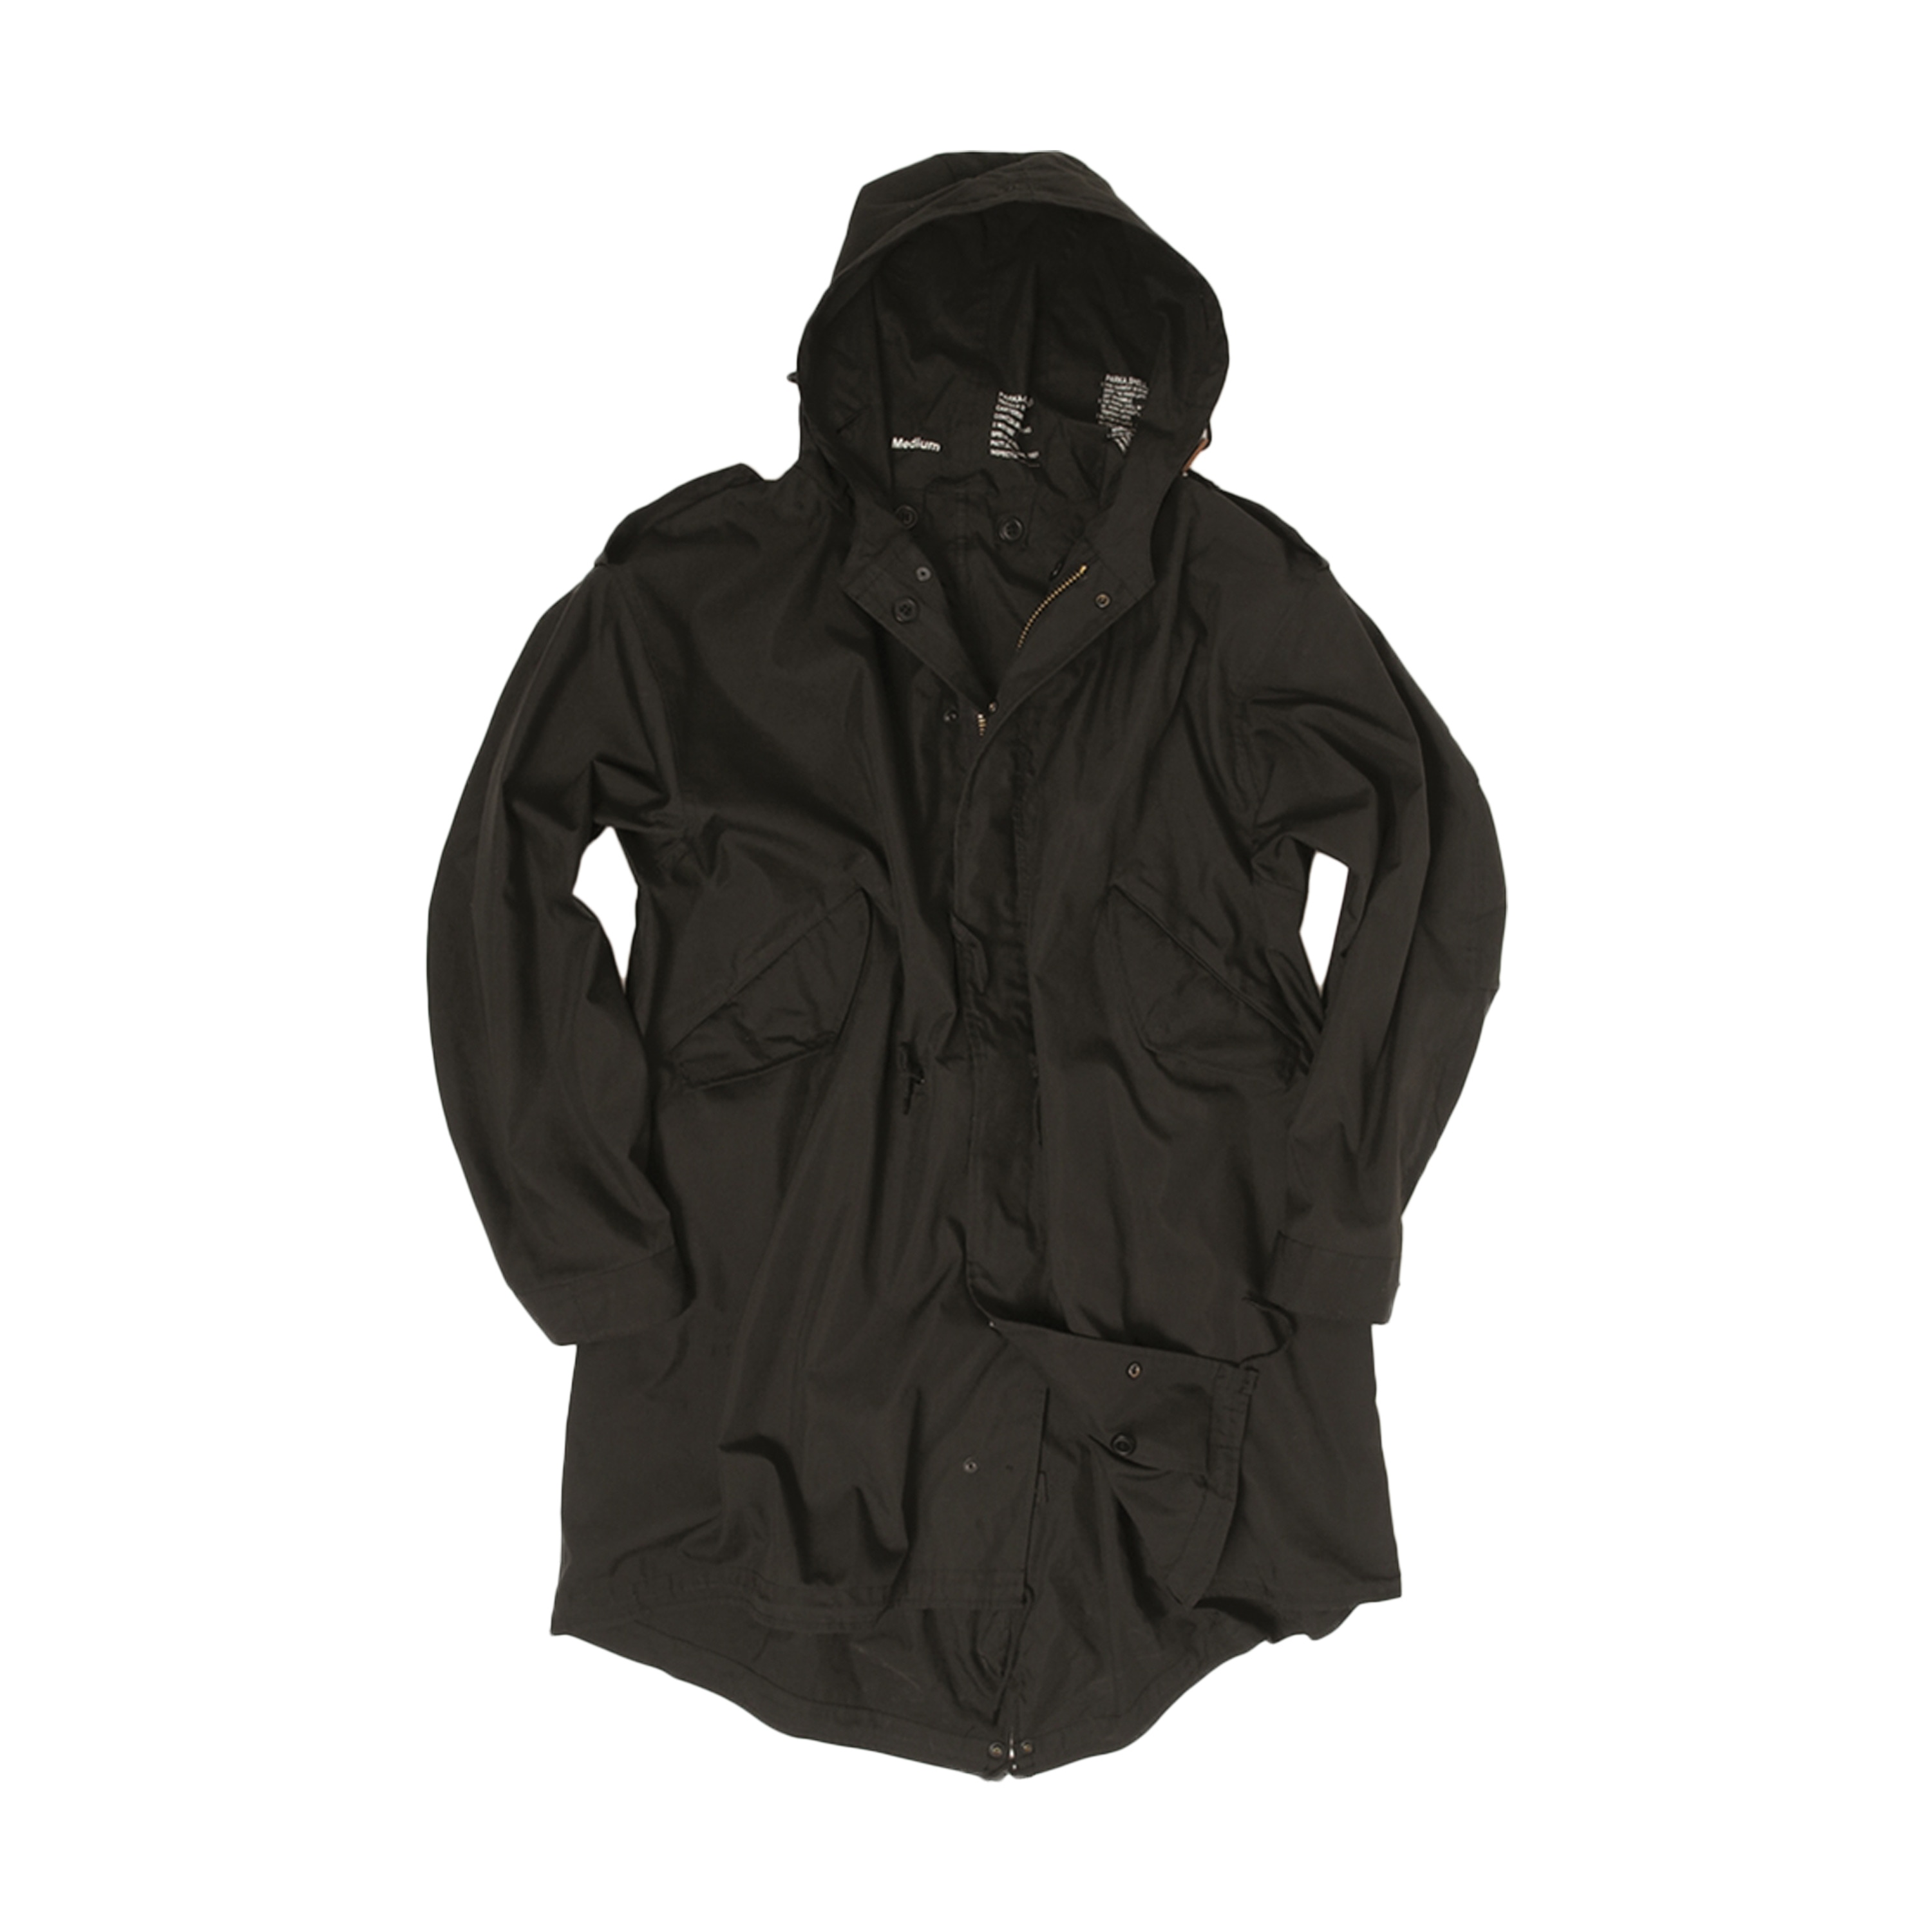 Purchase the U.S. Parka M51 with Liner black by ASMC